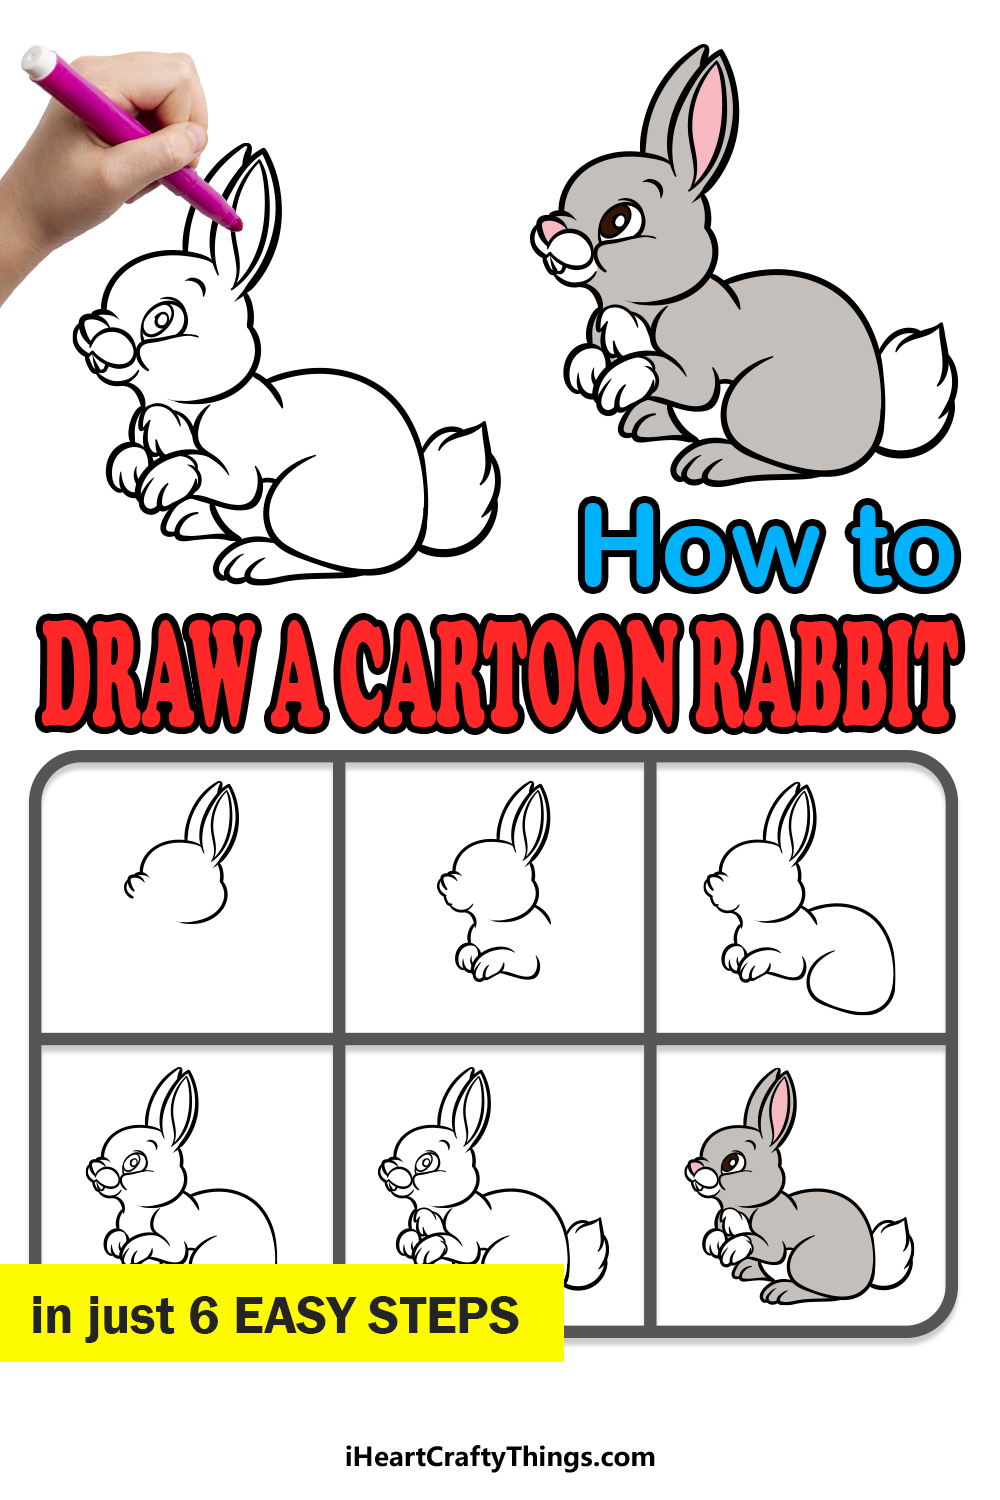 Cartoon Rabbit Drawing - How To Draw A Cartoon Rabbit Step By Step